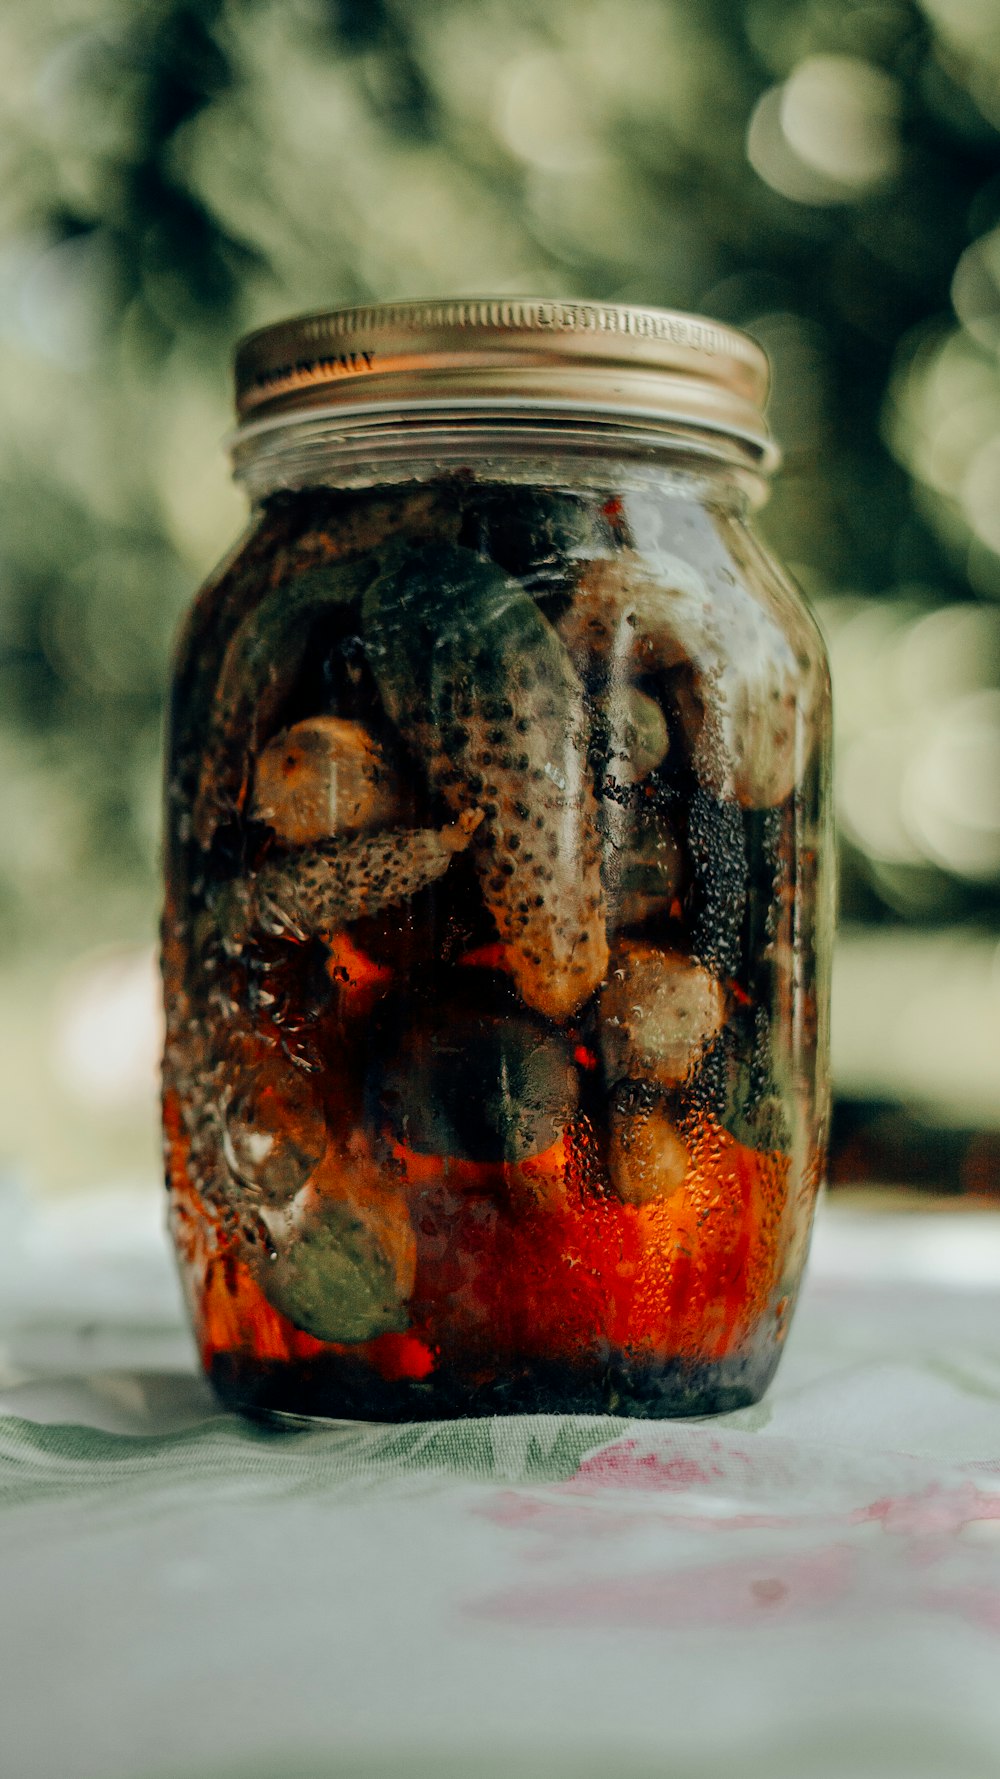 brown and black frog on clear glass jar